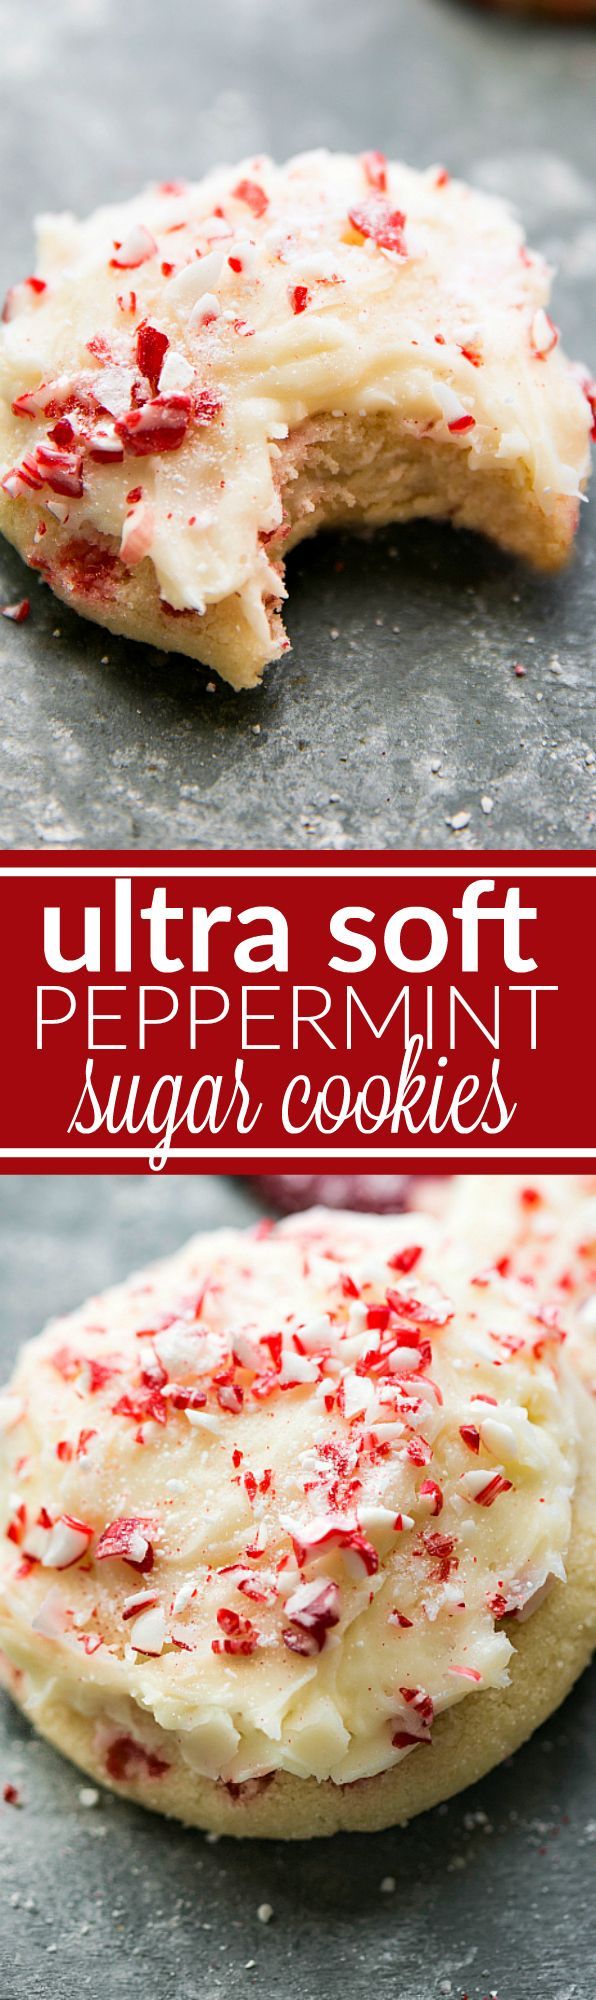 The Softest and most CHEWY Peppermint Sugar Cookies with a Peppermint Cream Cheese